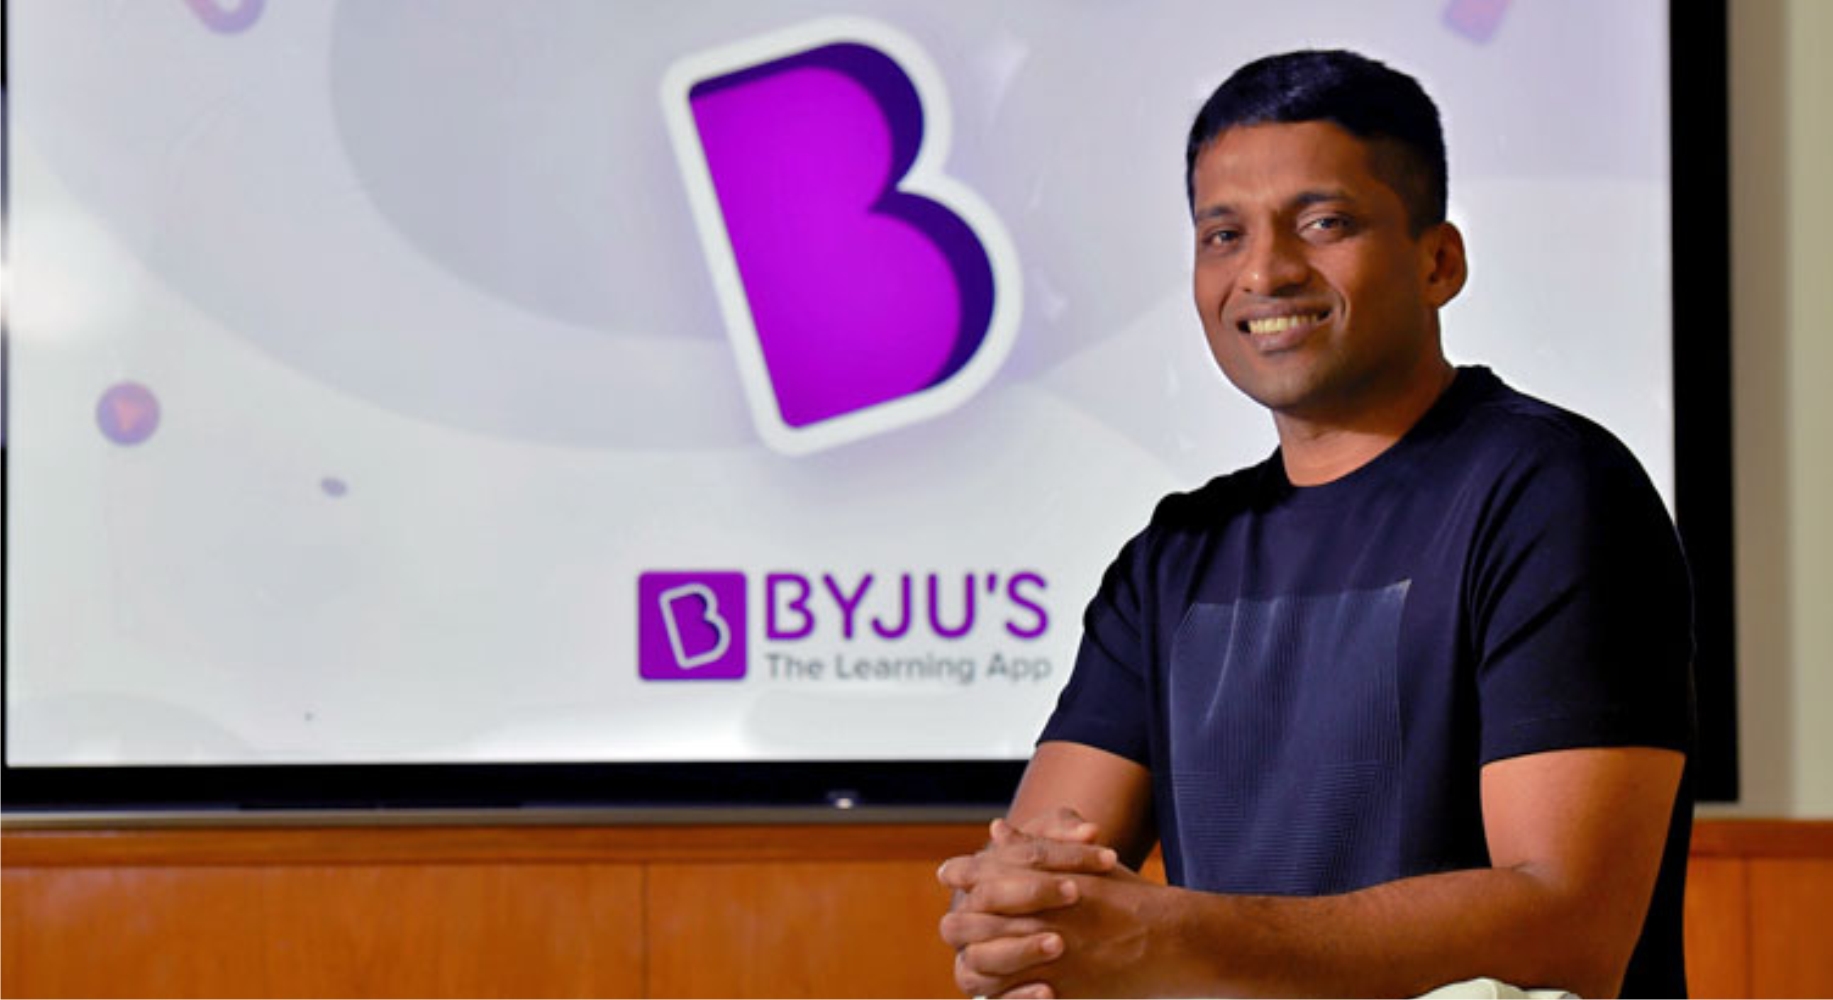 Meet targets or Quit! BYJU's new sales policy spooks thousands of employees  - Business Manager